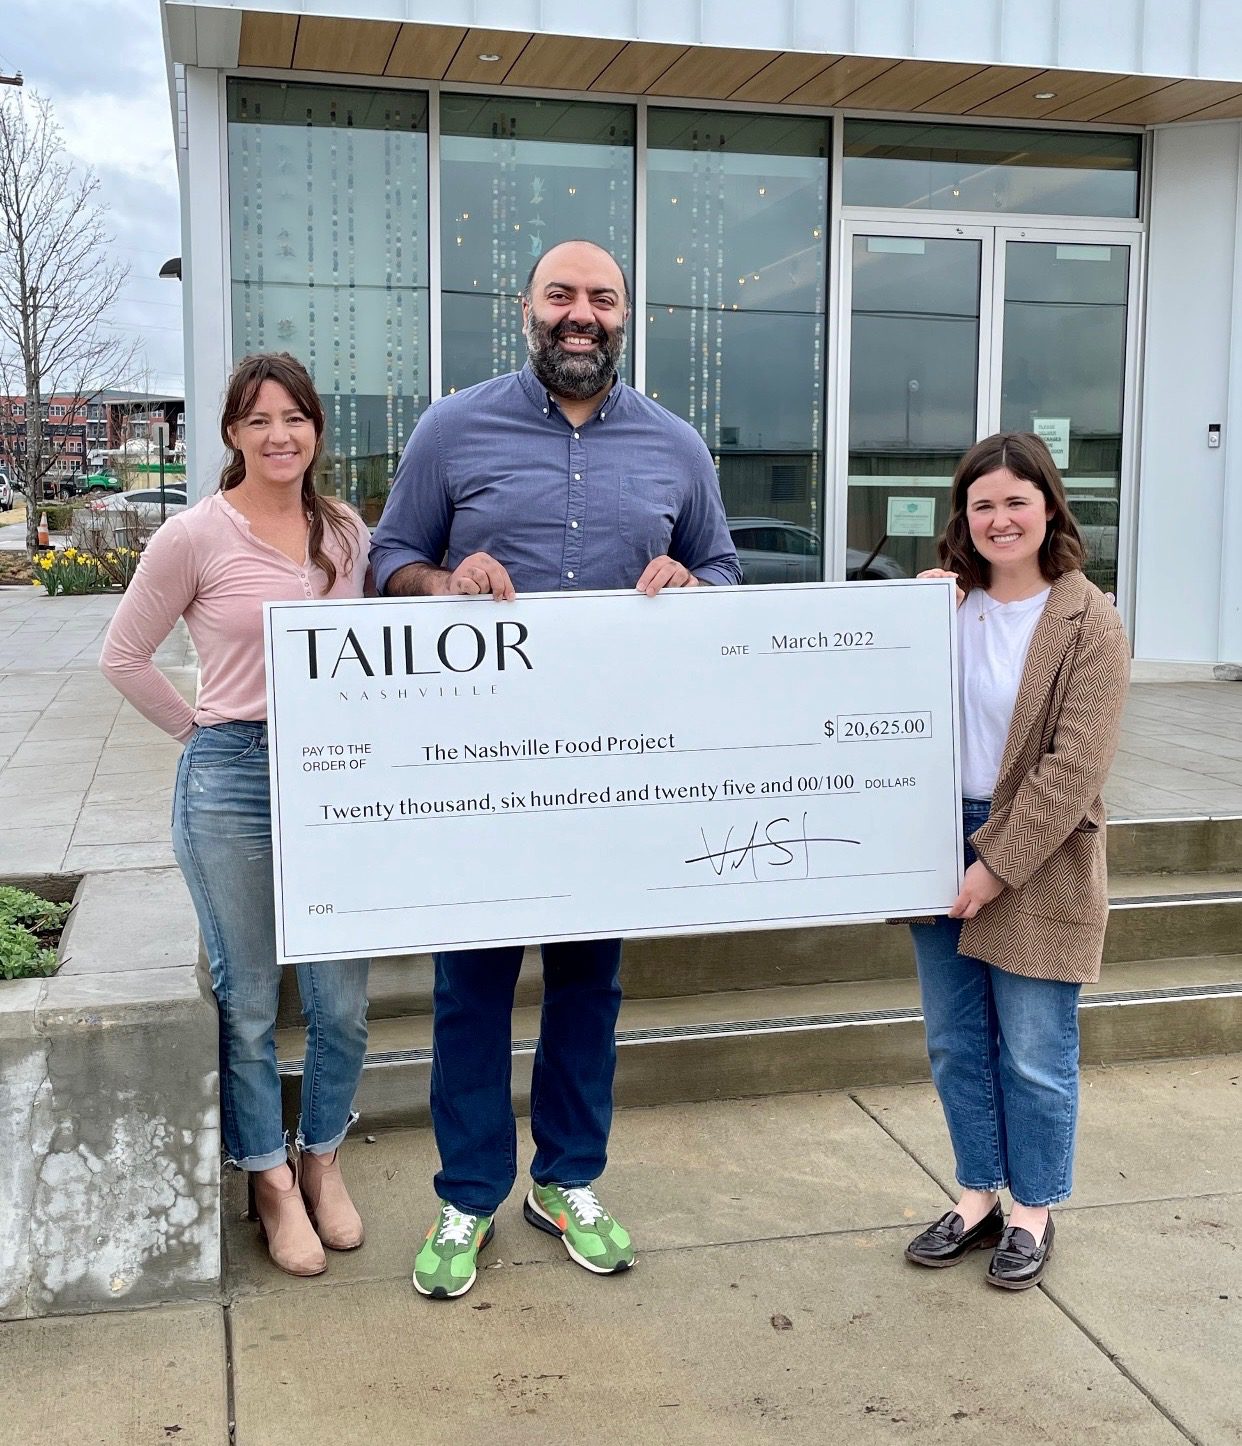 TAILOR presents check to The Nashville Food Project - Heather Southerland, Vivek Surti, Teri Sloan